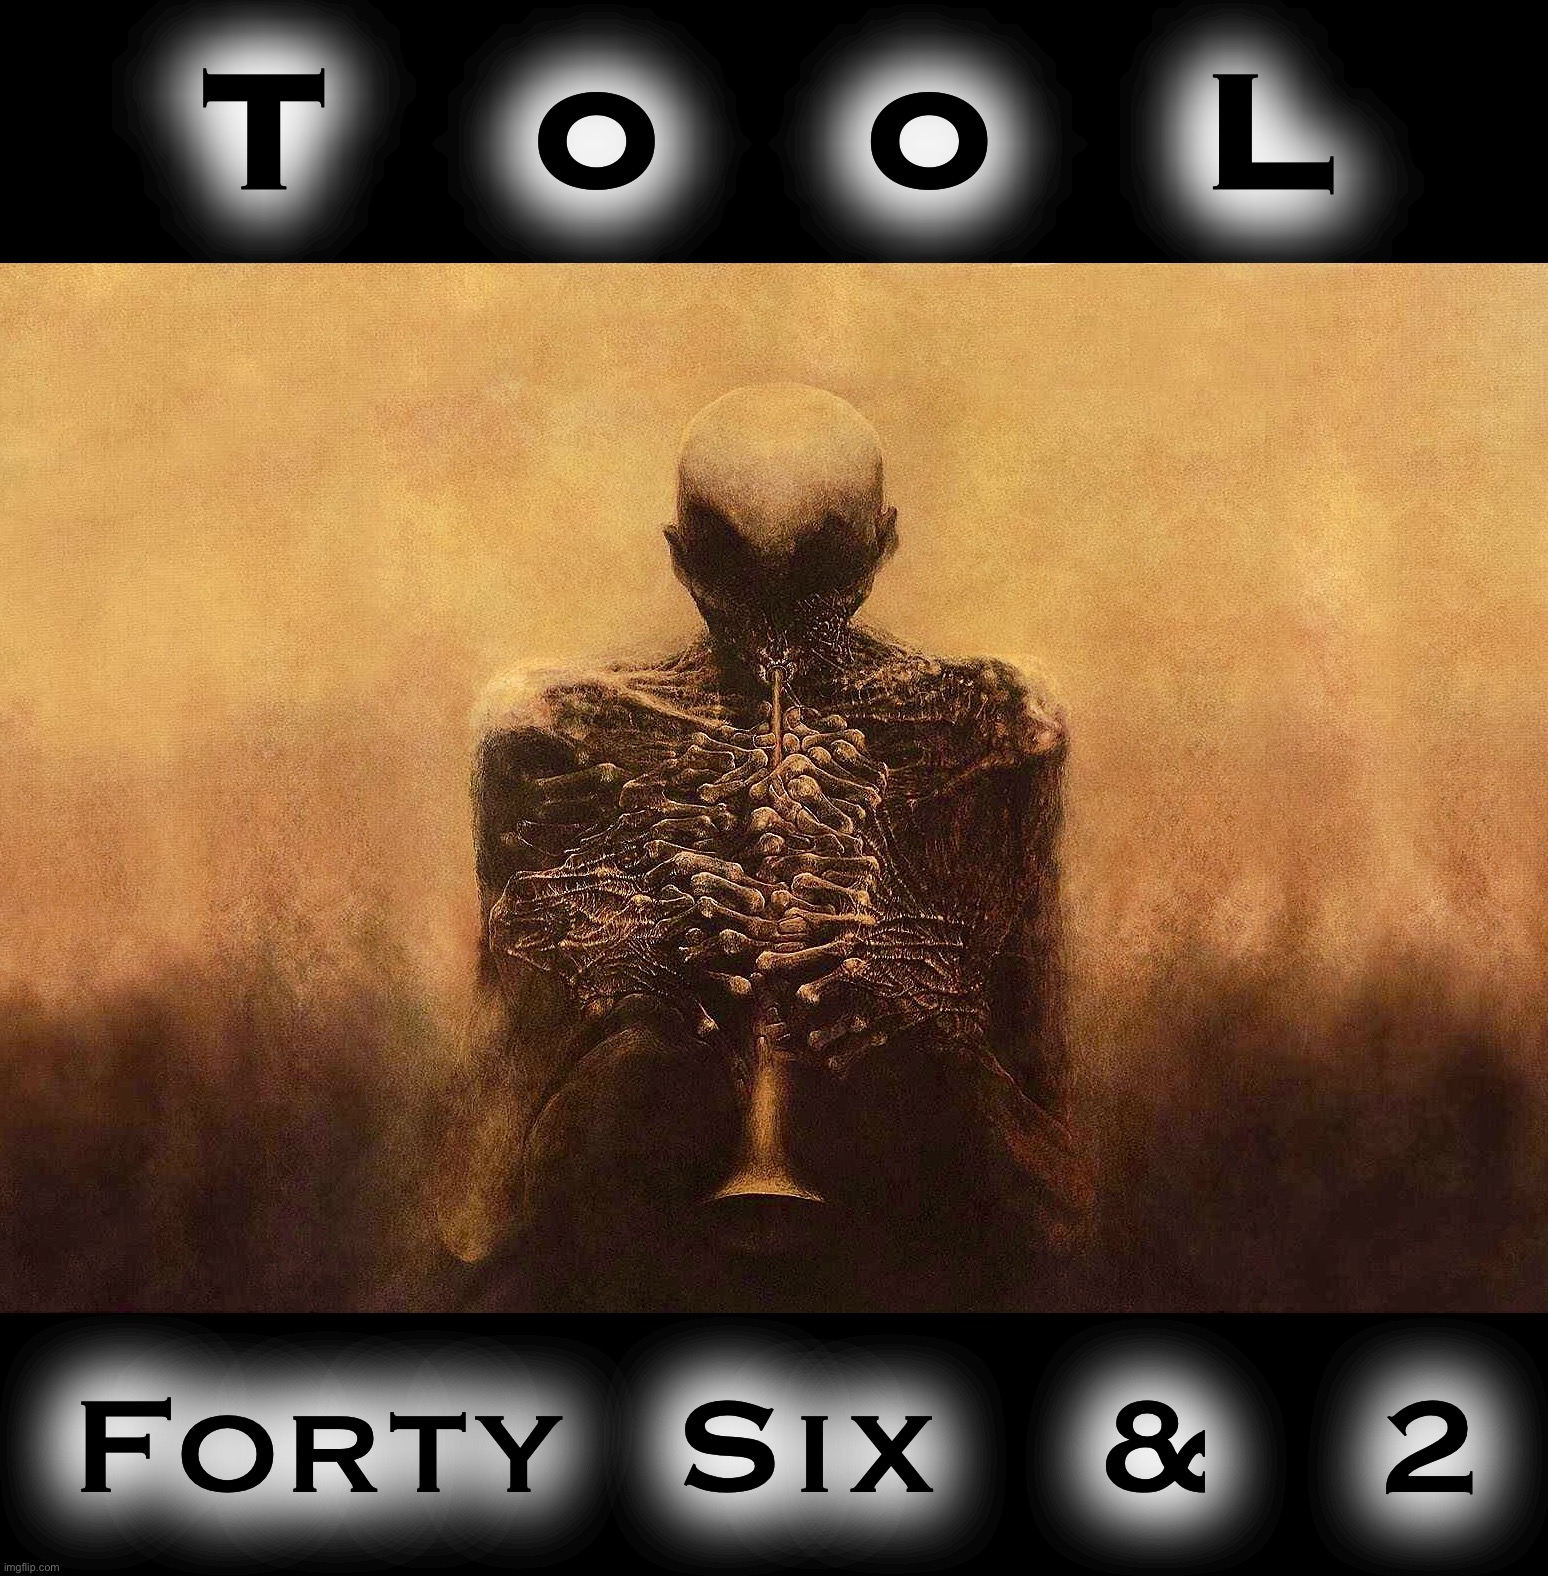 Forty Six & 2 | T   o   o   L; Forty  Six   &   2 | image tagged in tool,memes,surreal,album,fun,nightmare | made w/ Imgflip meme maker